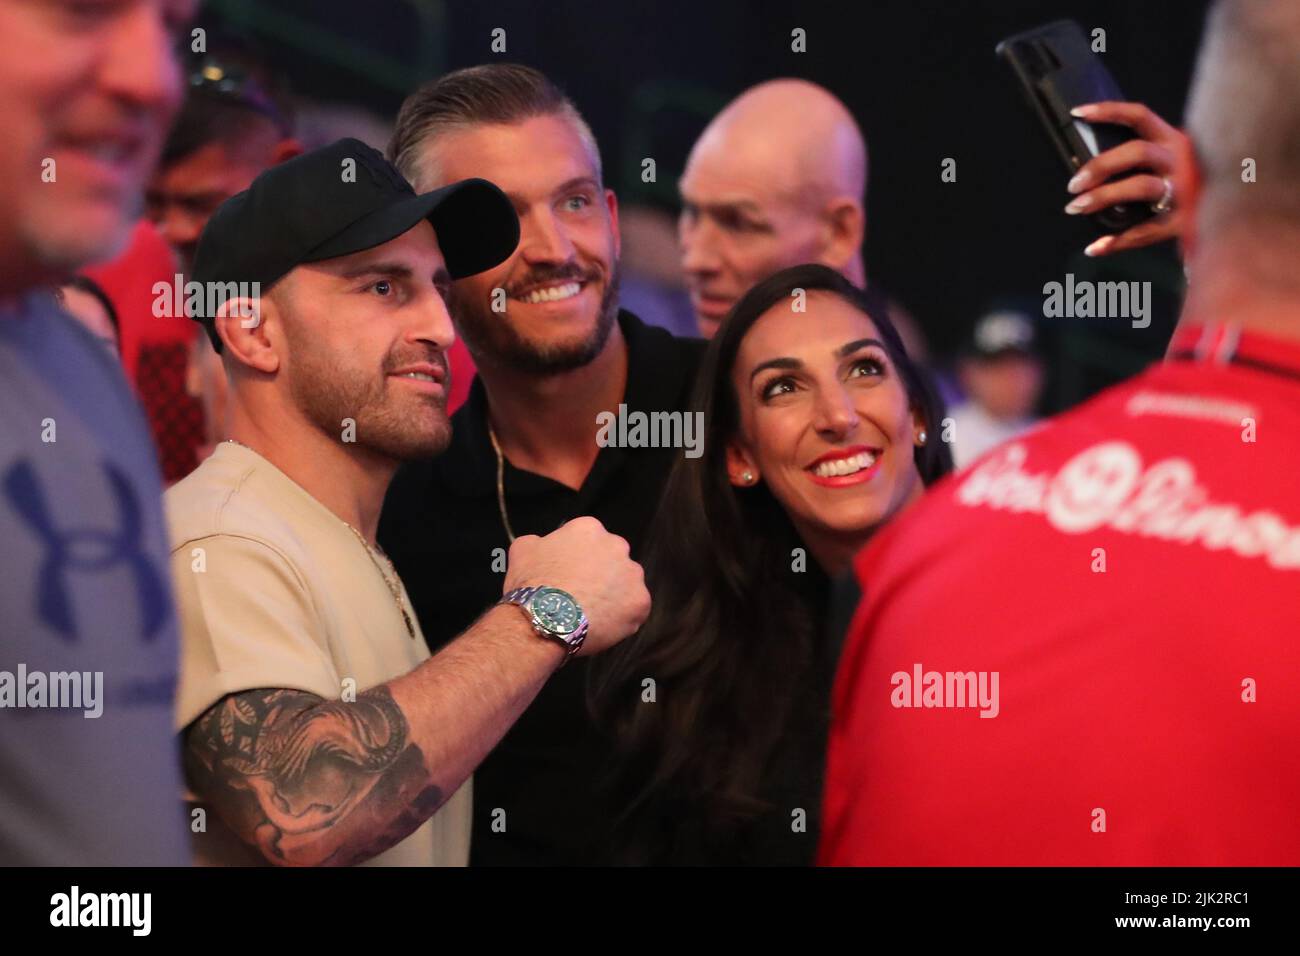 Dallas, USA. 29th July, 2022. DALLAS, TX - JULY 29: UFC Featherweight Champion Alexander Volkanovski poses for pictures with fans during the ceremonial weigh-in at American Airlines Center for UFC 277 - Peña vs Nunes 2: Ceremonial Weigh-ins on July 29, 2022 in Dallas, TX, United States. (Photo by Alejandro Salazar/PxImages) Credit: Px Images/Alamy Live News Stock Photo